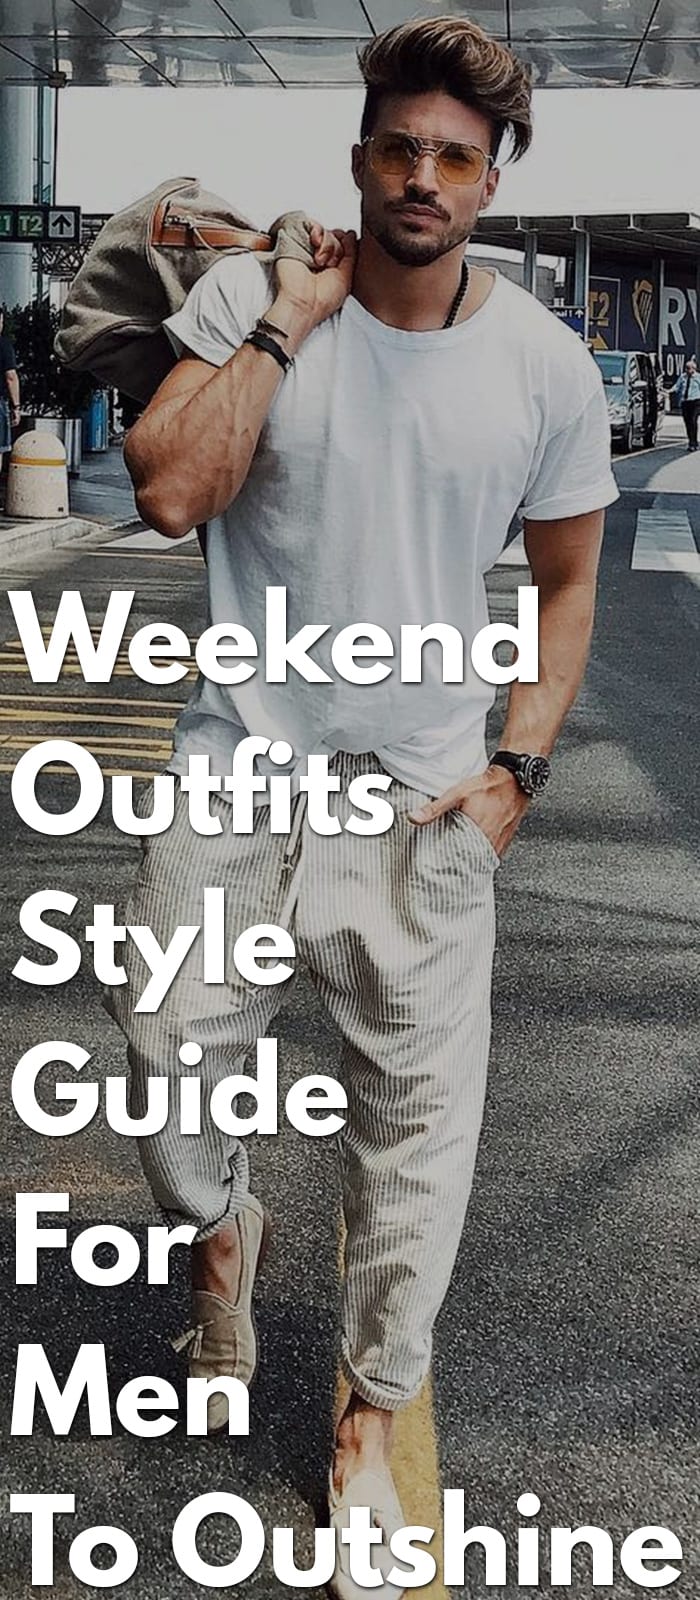 Weekend-Outfits-Style-Guide-For-Men-To-Outshine